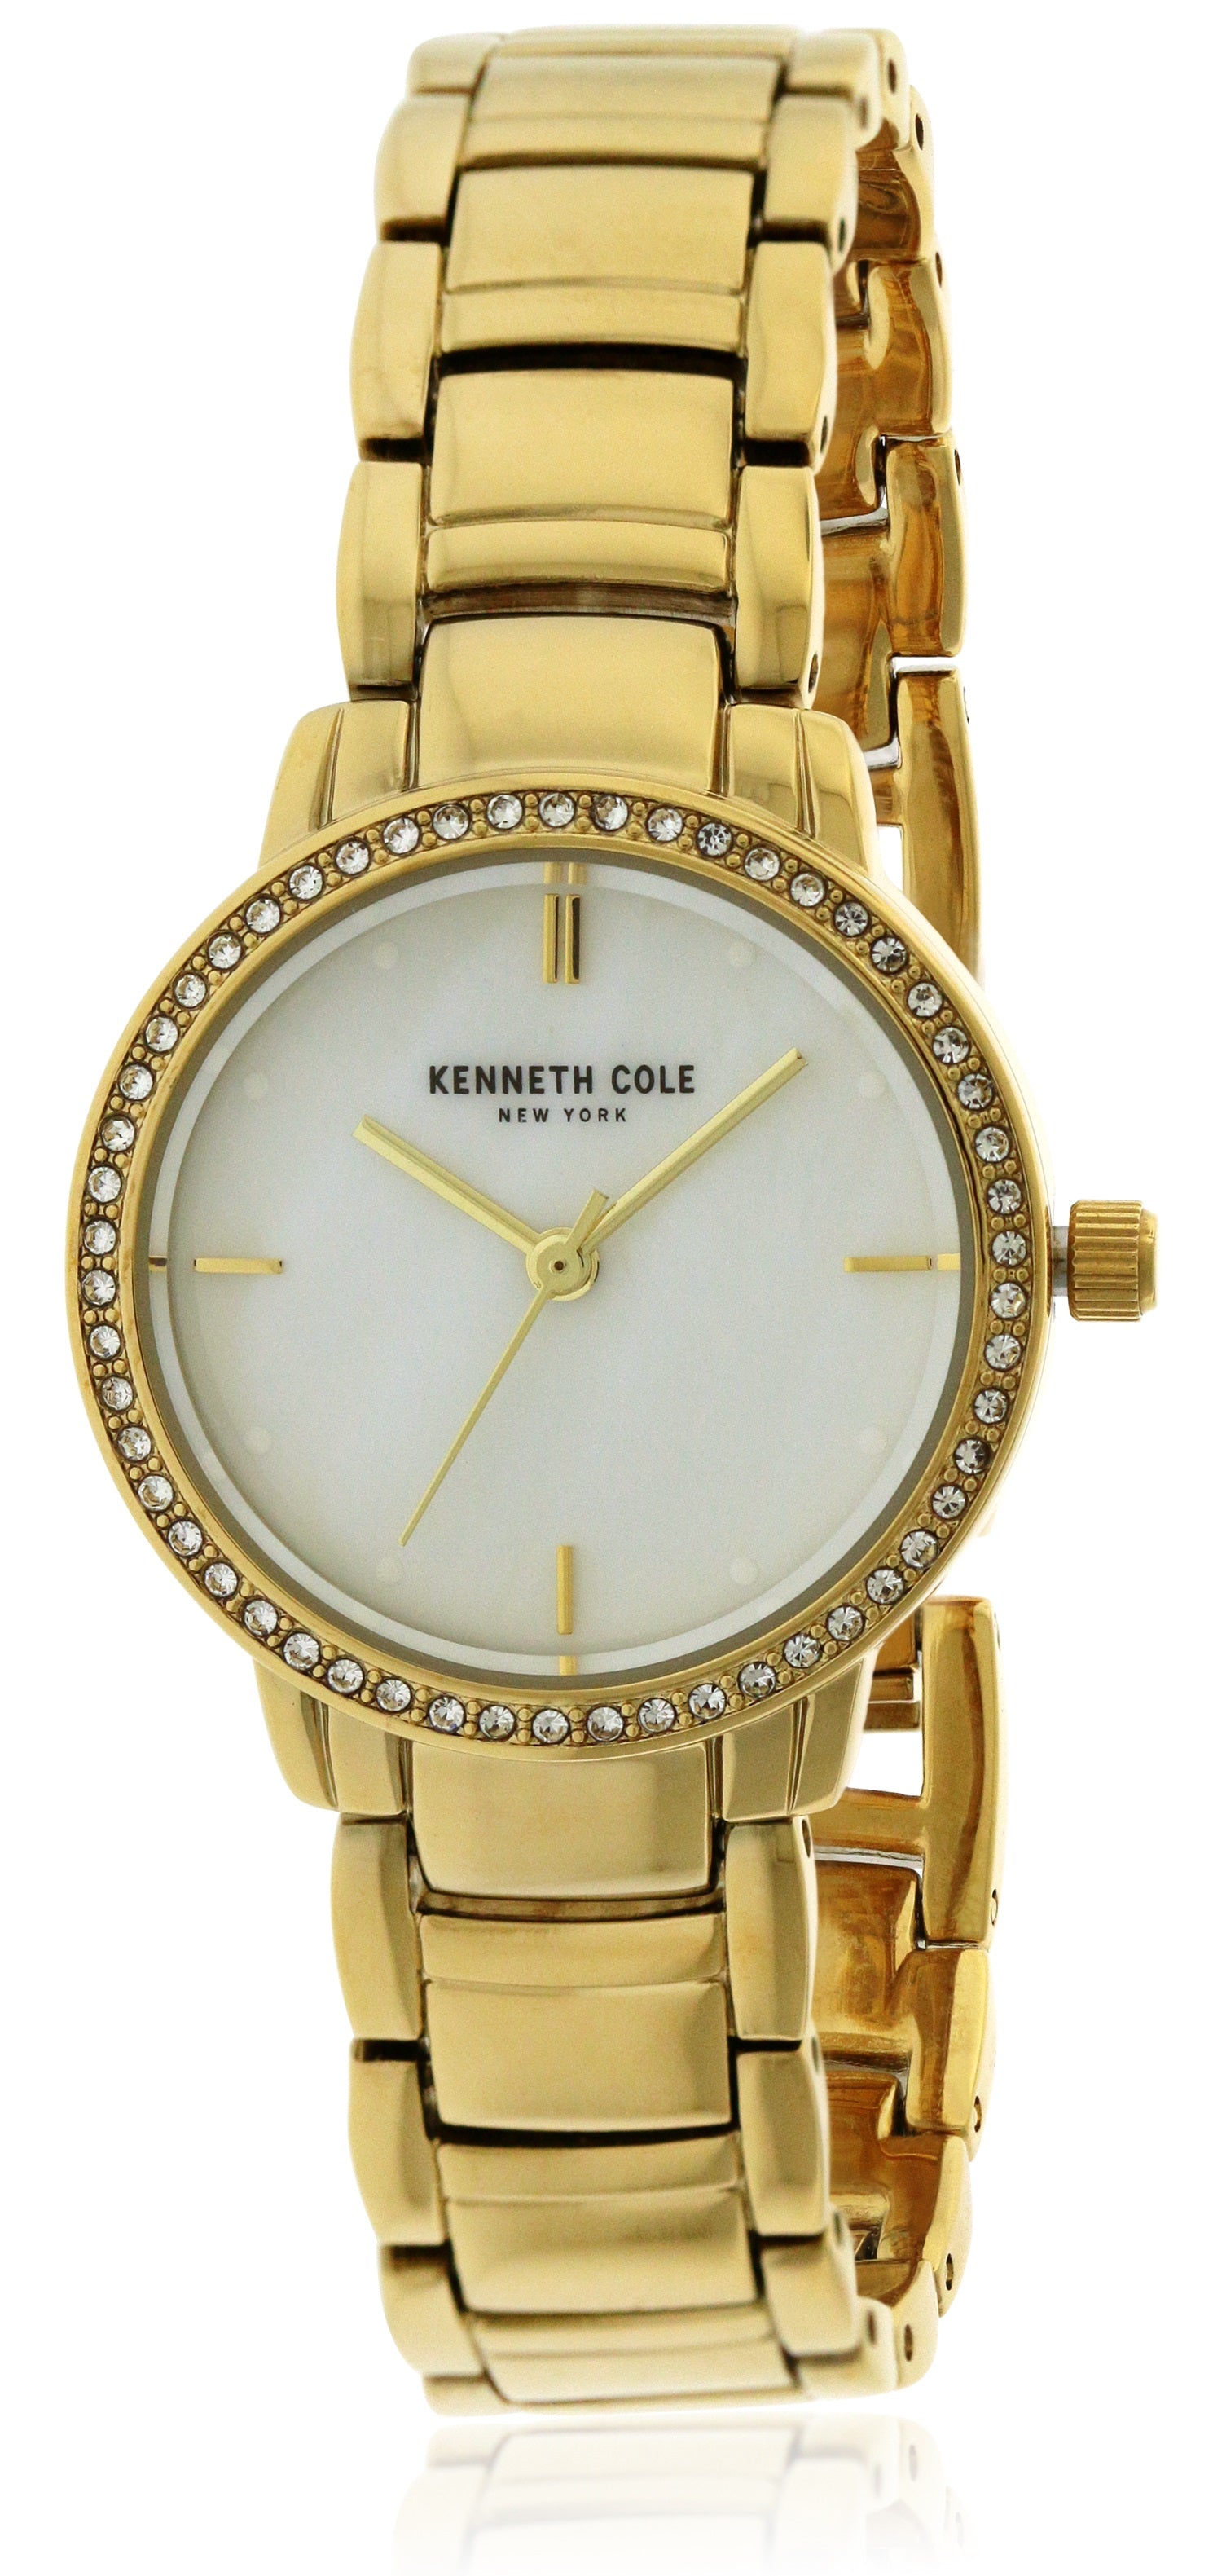 Kenneth Cole Gold-Tone Ladies Watch